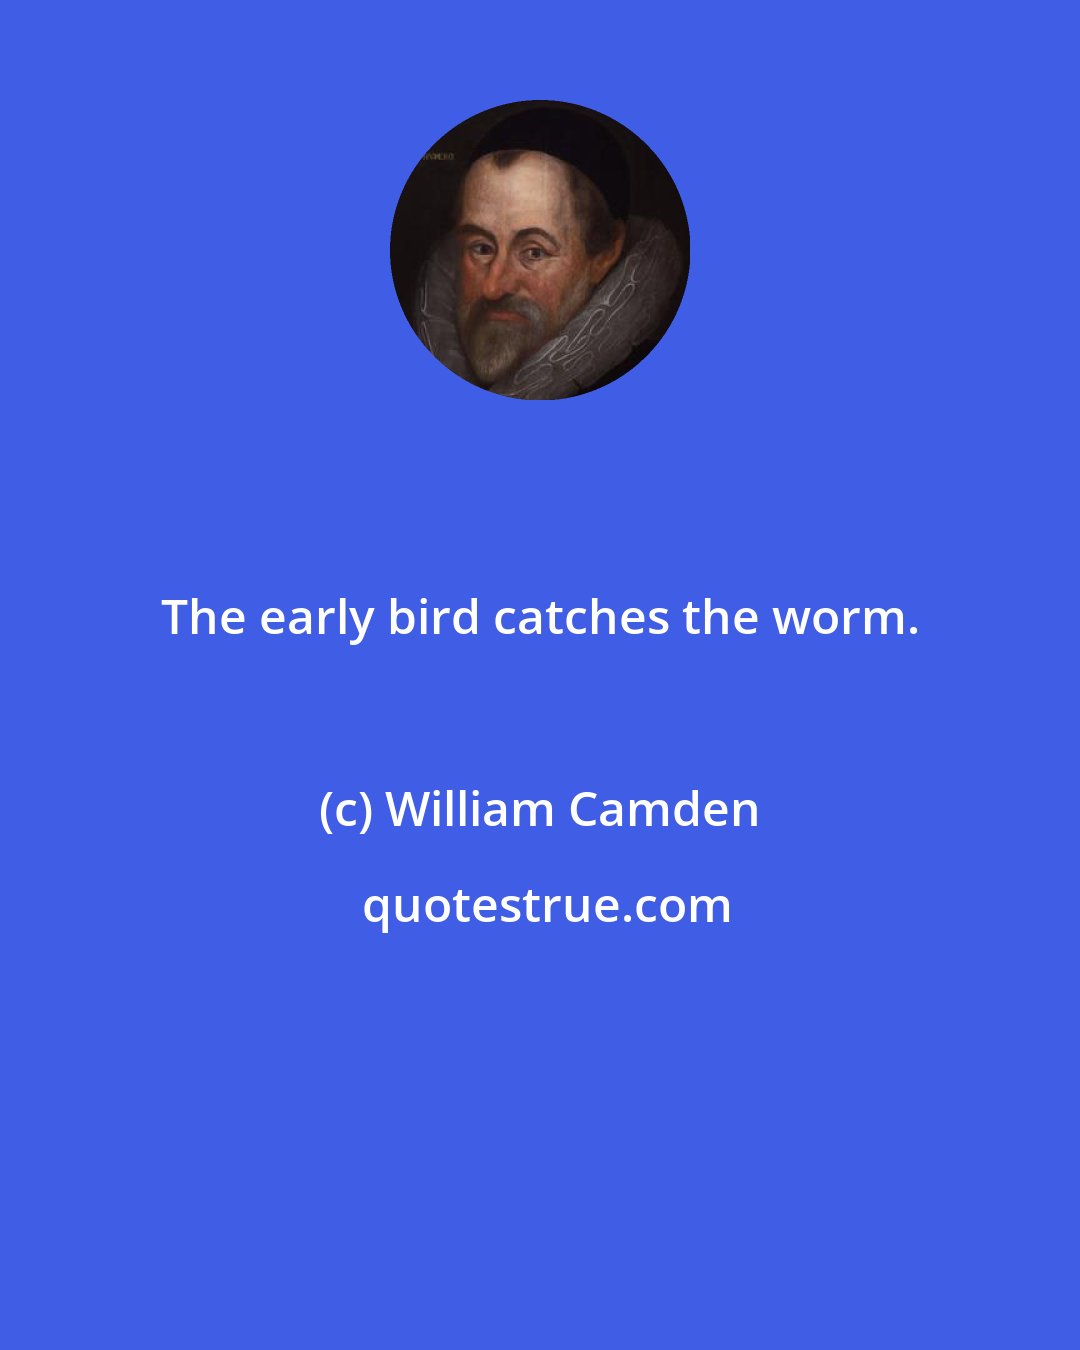 William Camden: The early bird catches the worm.